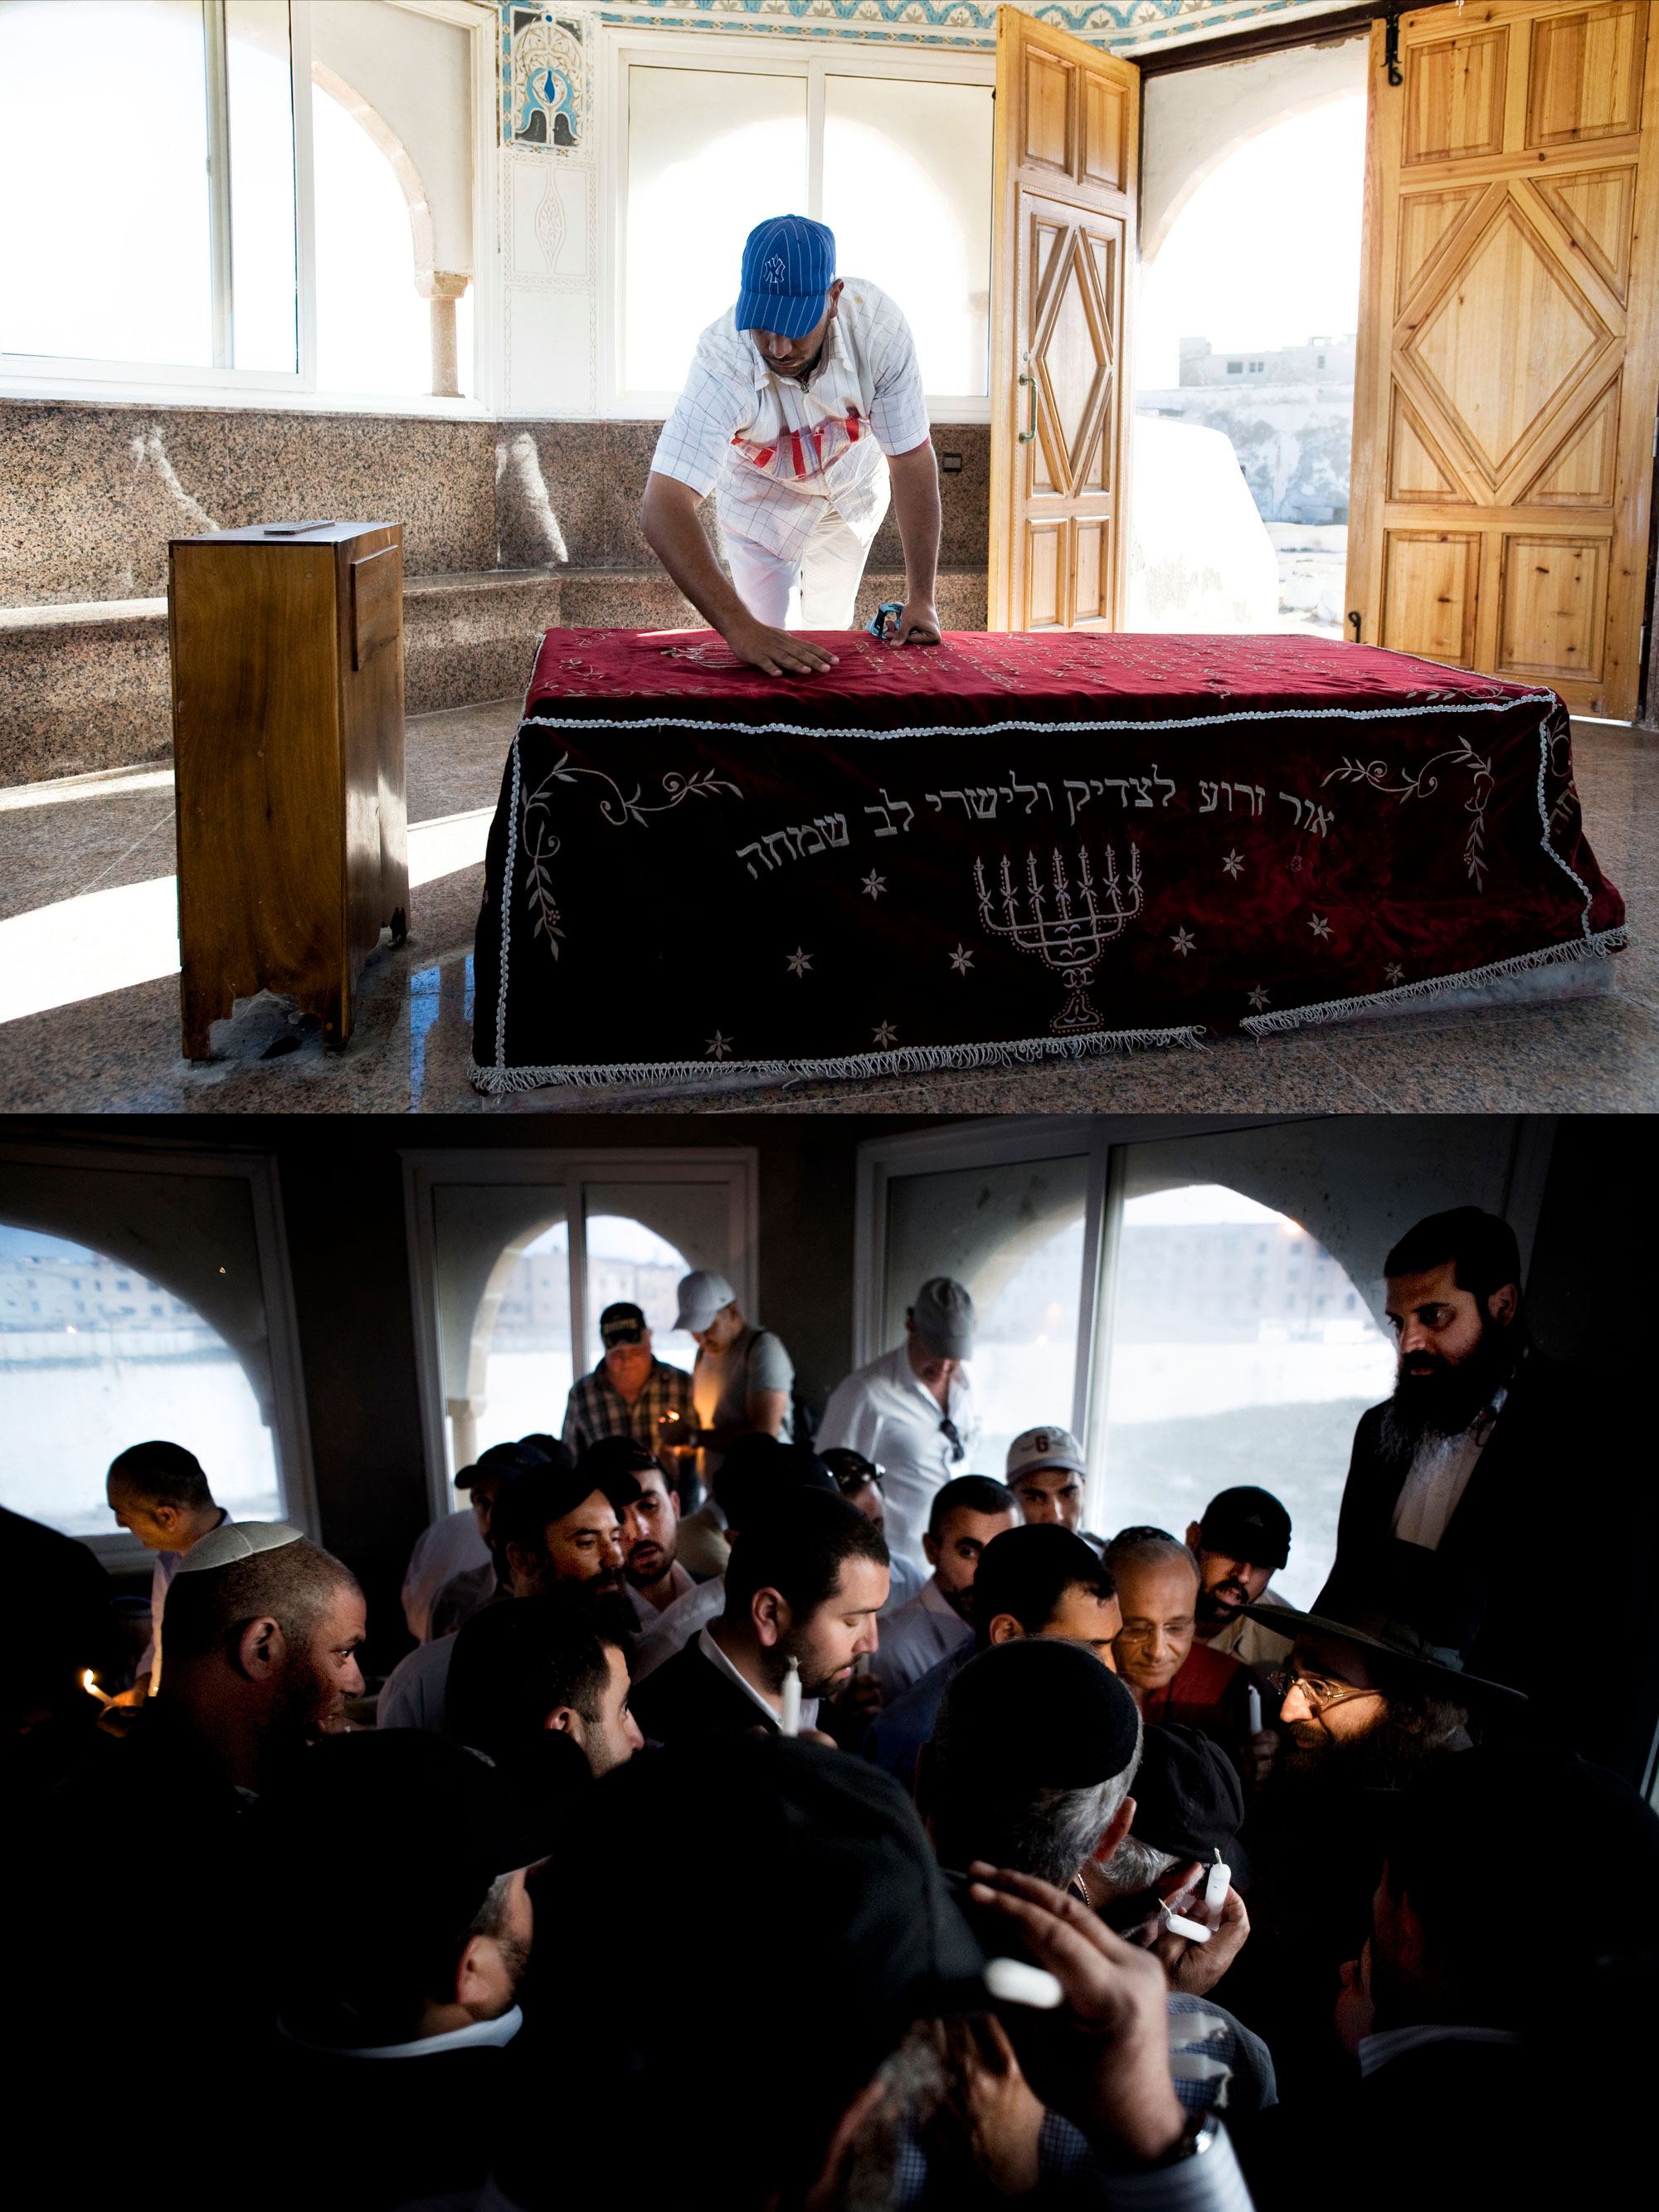 Top photo: Mouhssine Arouche tends to the tomb of the Jewish saint Rabbi Haim Pinto in the 400 year old cemetery of Essaouira. Arouche has been the guardian of the cemetery for 10 years. Before him, his grandfather was the guardian. Bottom photo: Rabbi Youseph Pinto, who lives in Israel, lights the candles of pilgrims visiting the tomb of his grandfather, Rabbi Haim Pinto. (Photos: Aaron Vincent Elkaim) 